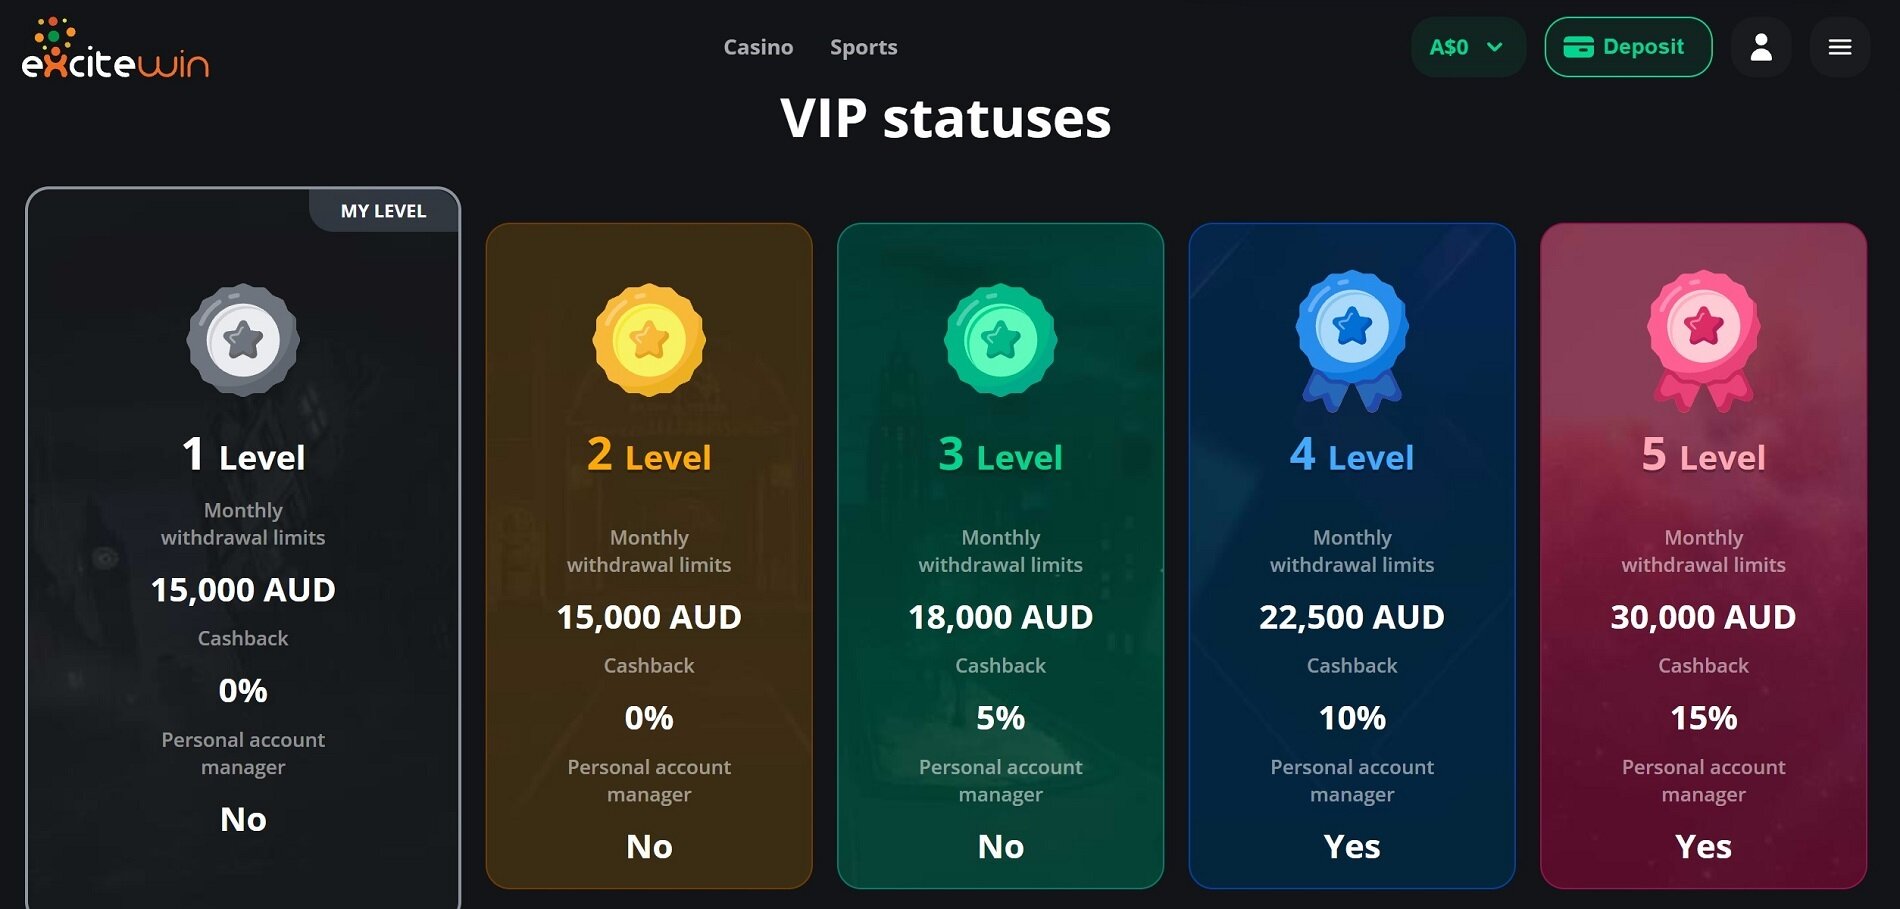 ExciteWin VIP levels